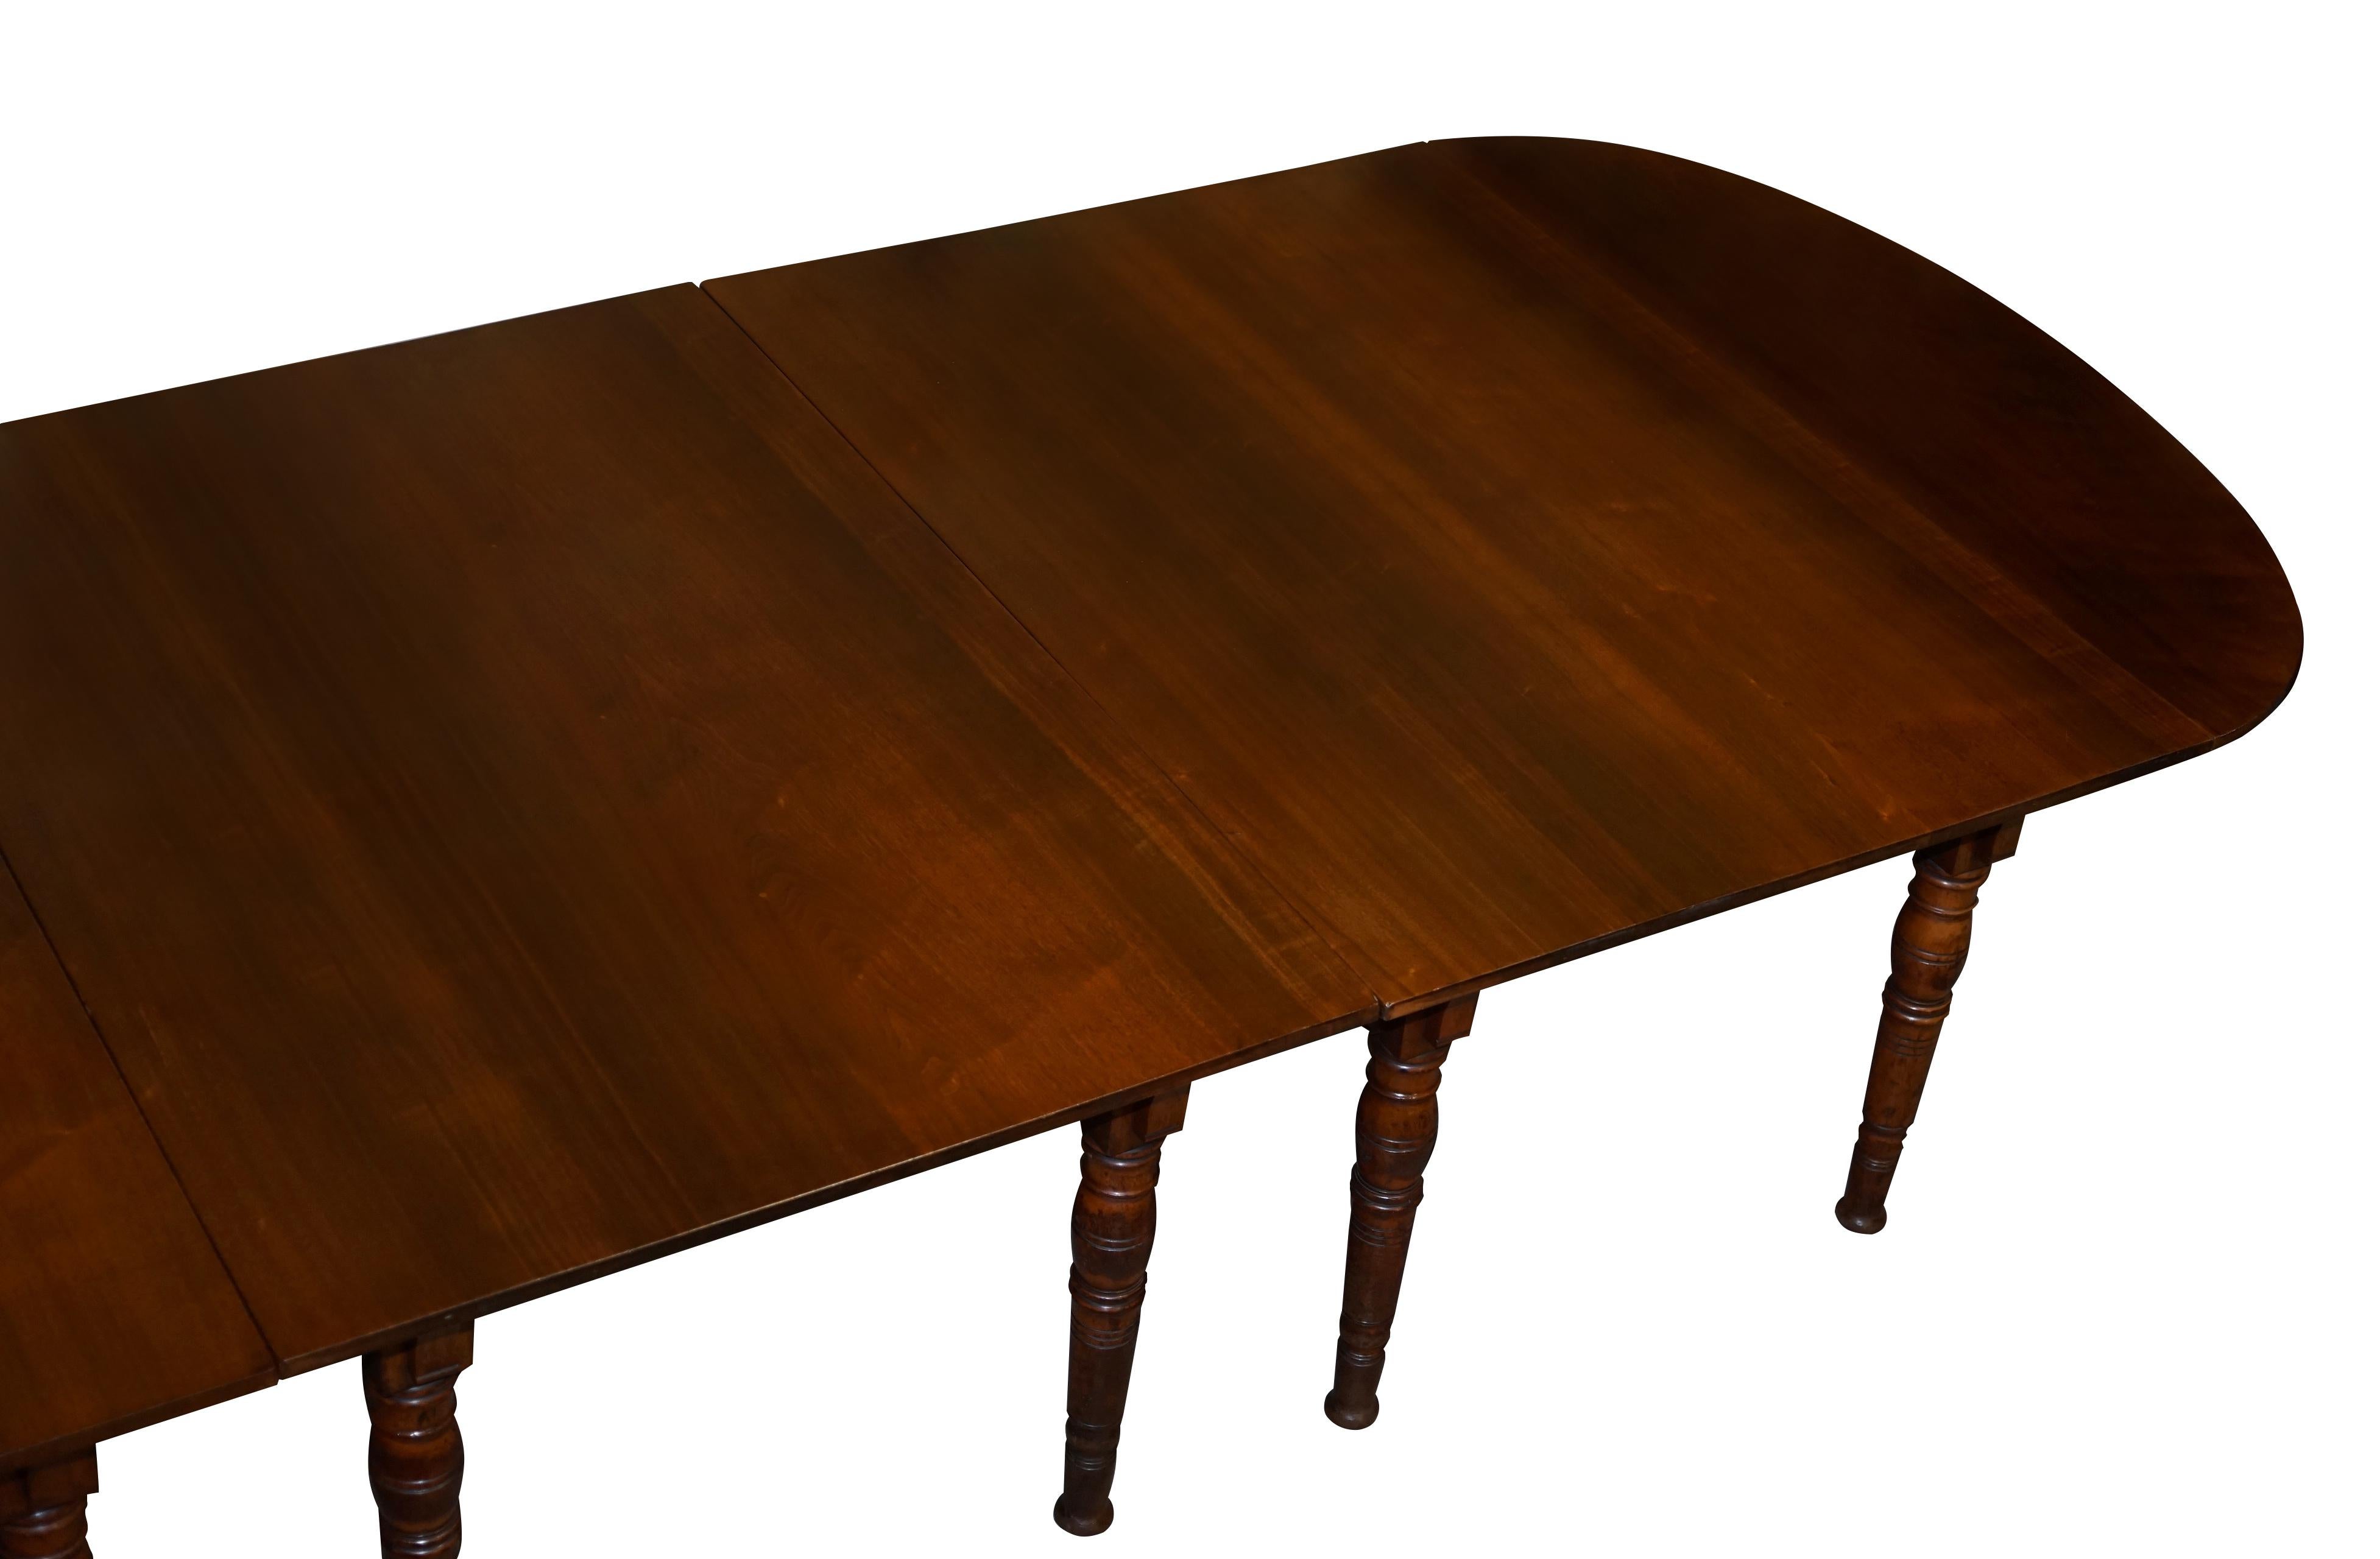 Rare Gillows Lancaster 1789-1795 George III American Walnut Dining Table For Sale 6